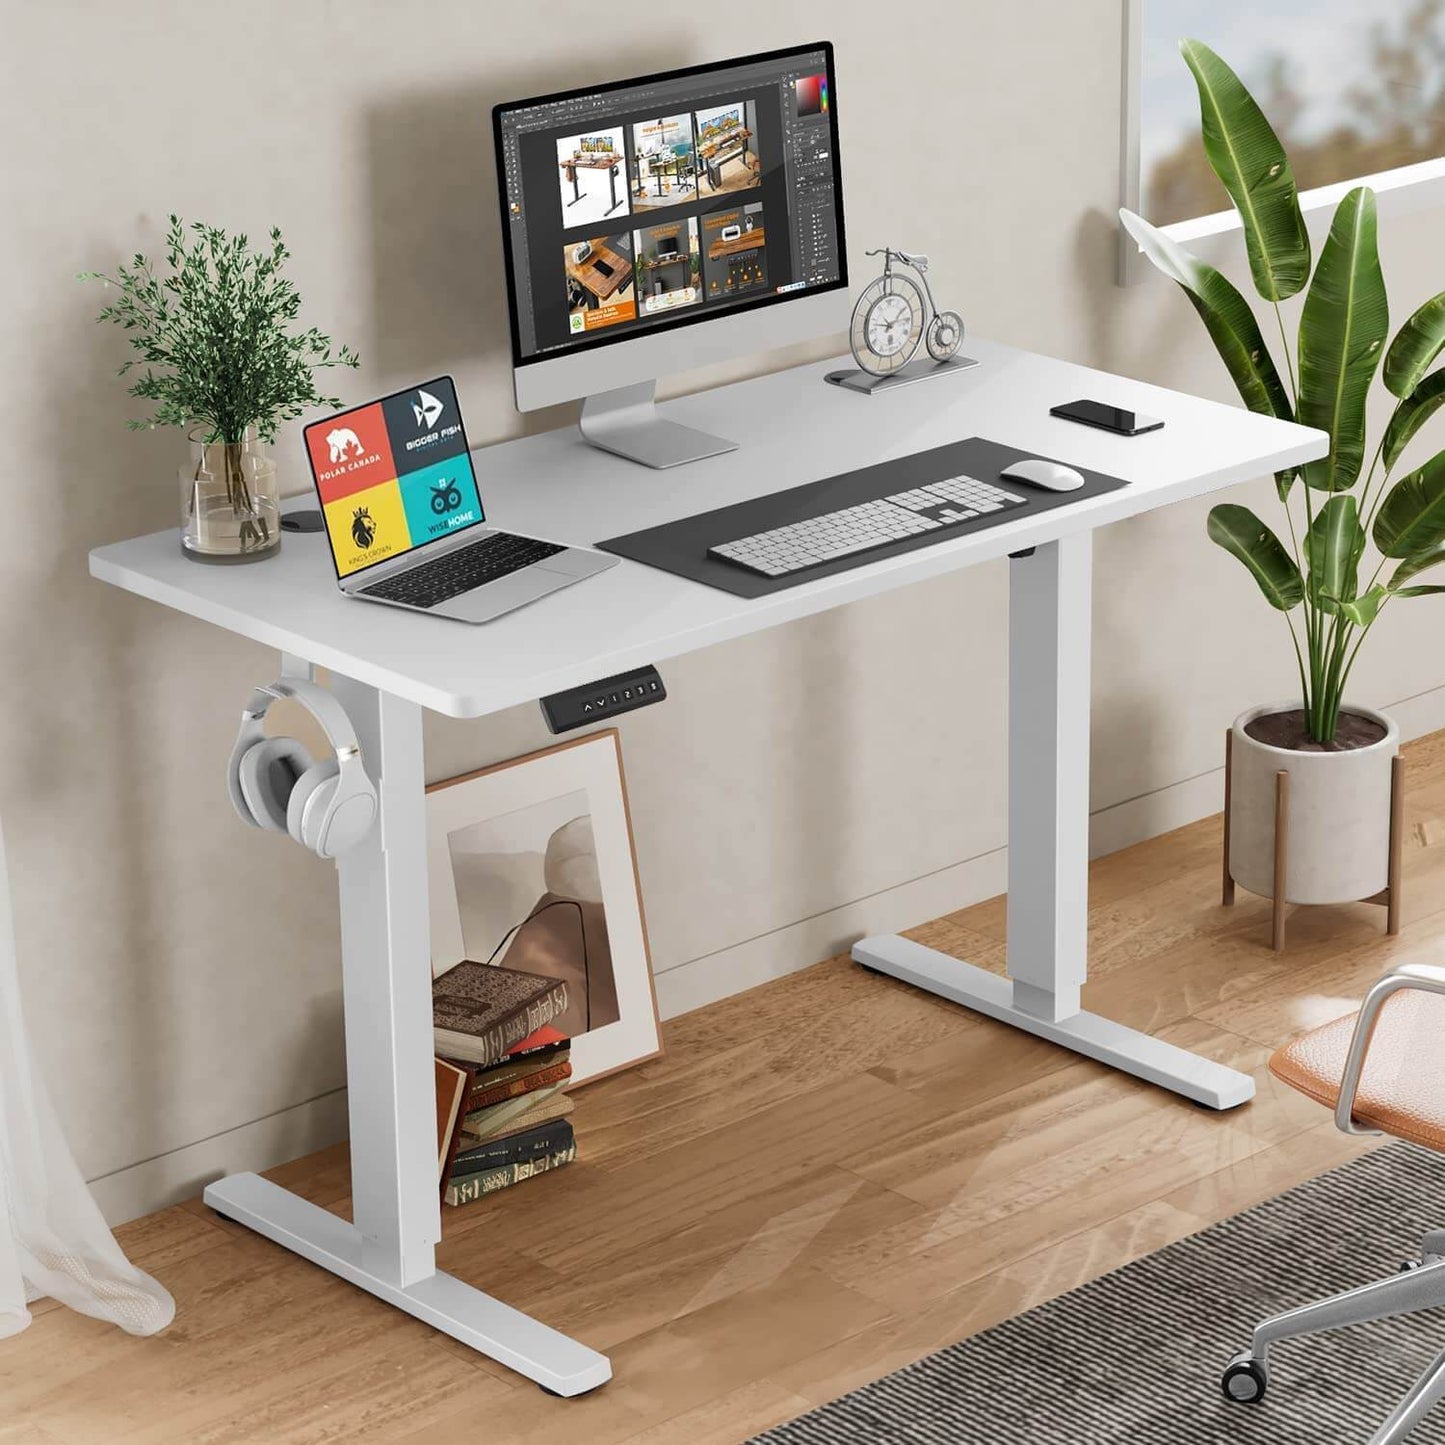 Height Adjustable Electric Standing Desk in White, 48'' x 24''